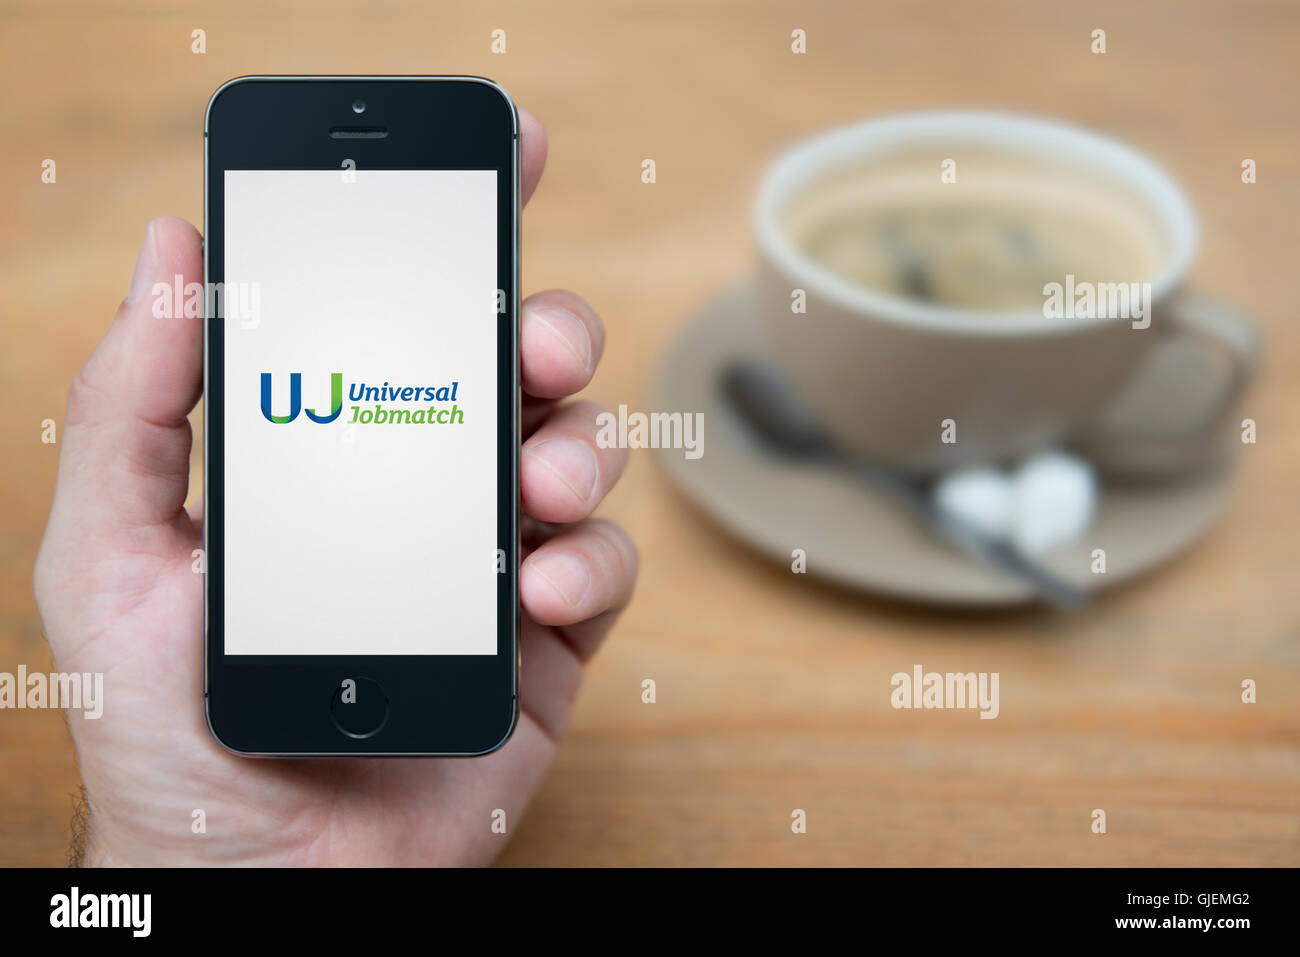 A man looks at his iPhone which displays the Universal Jobmatch logo, while sat with a cup of coffee (Editorial use only). Stock Photo